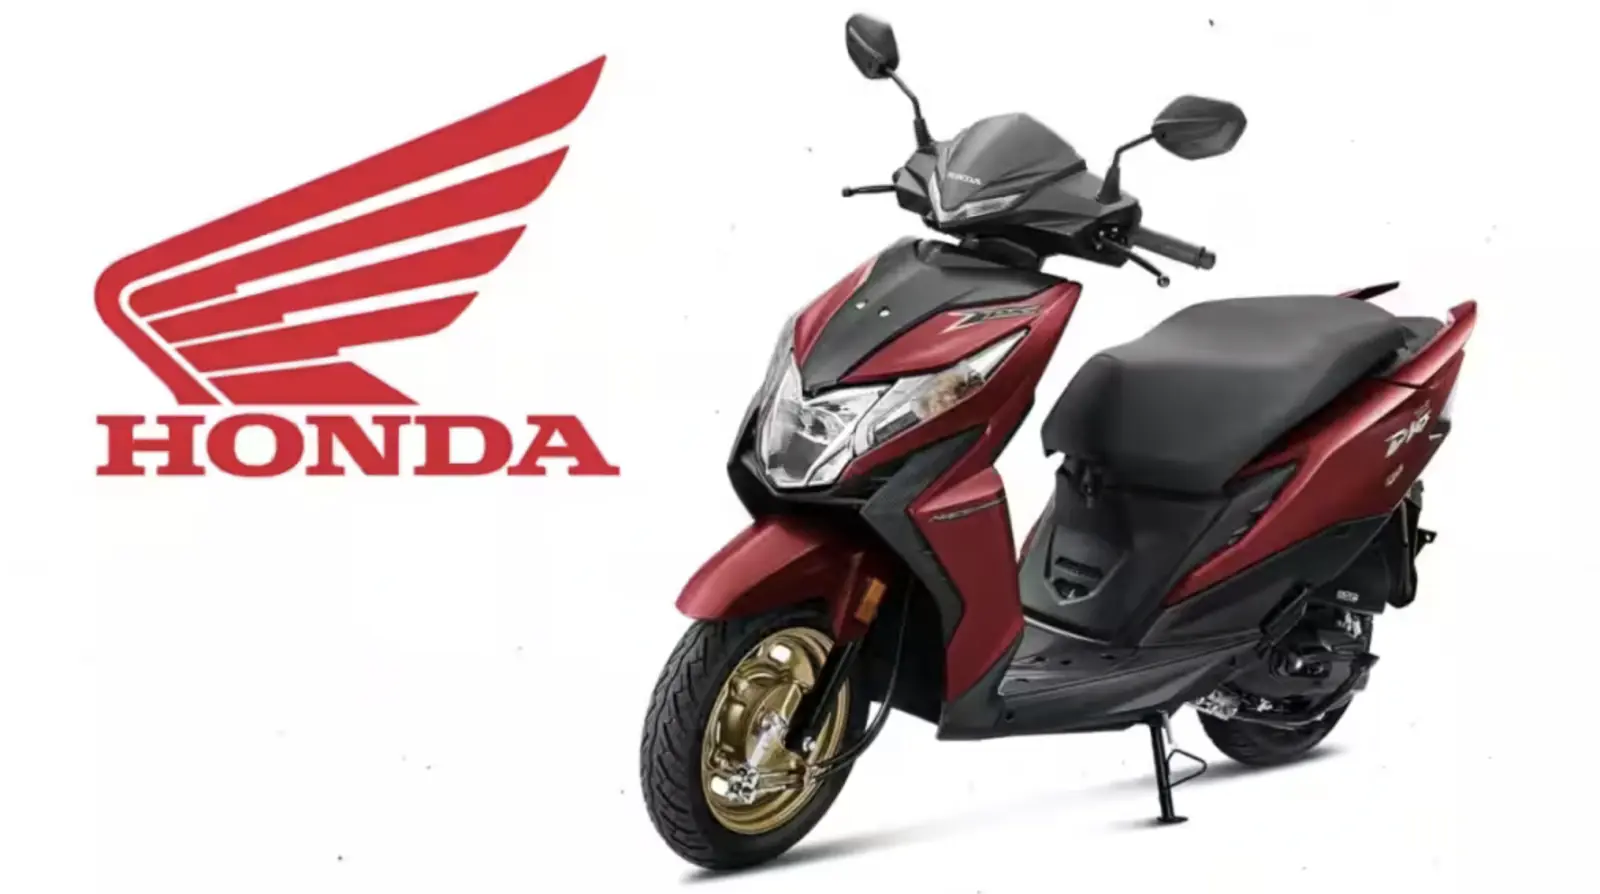 Honda sold 4.92 lakh two-wheelers, got 49 percent growth, know full details